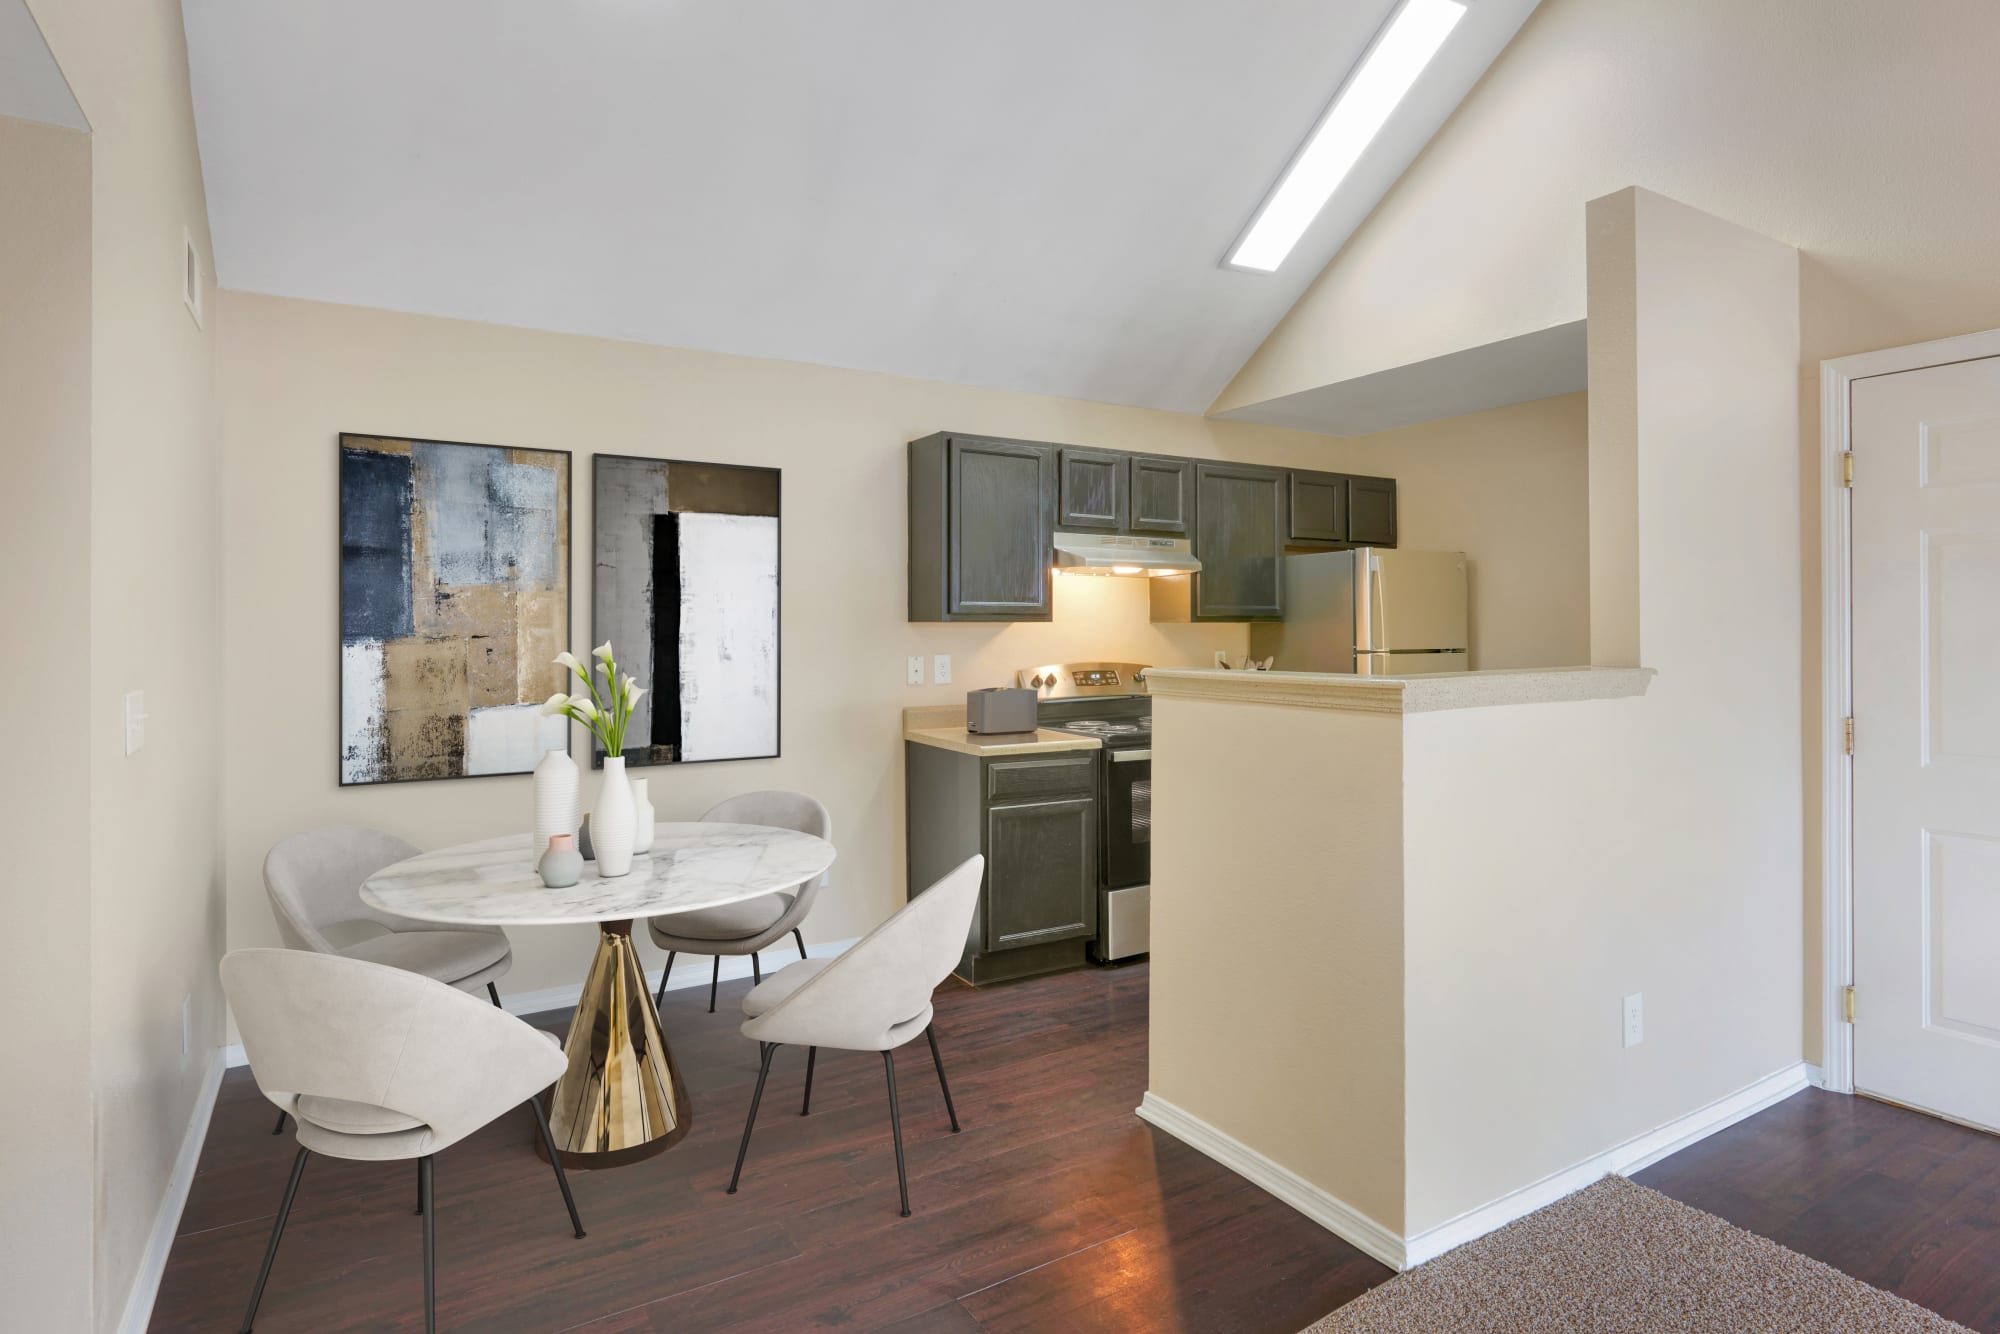 Kitchen and dining room at Crossroads at City Center Apartments in Aurora, Colorado